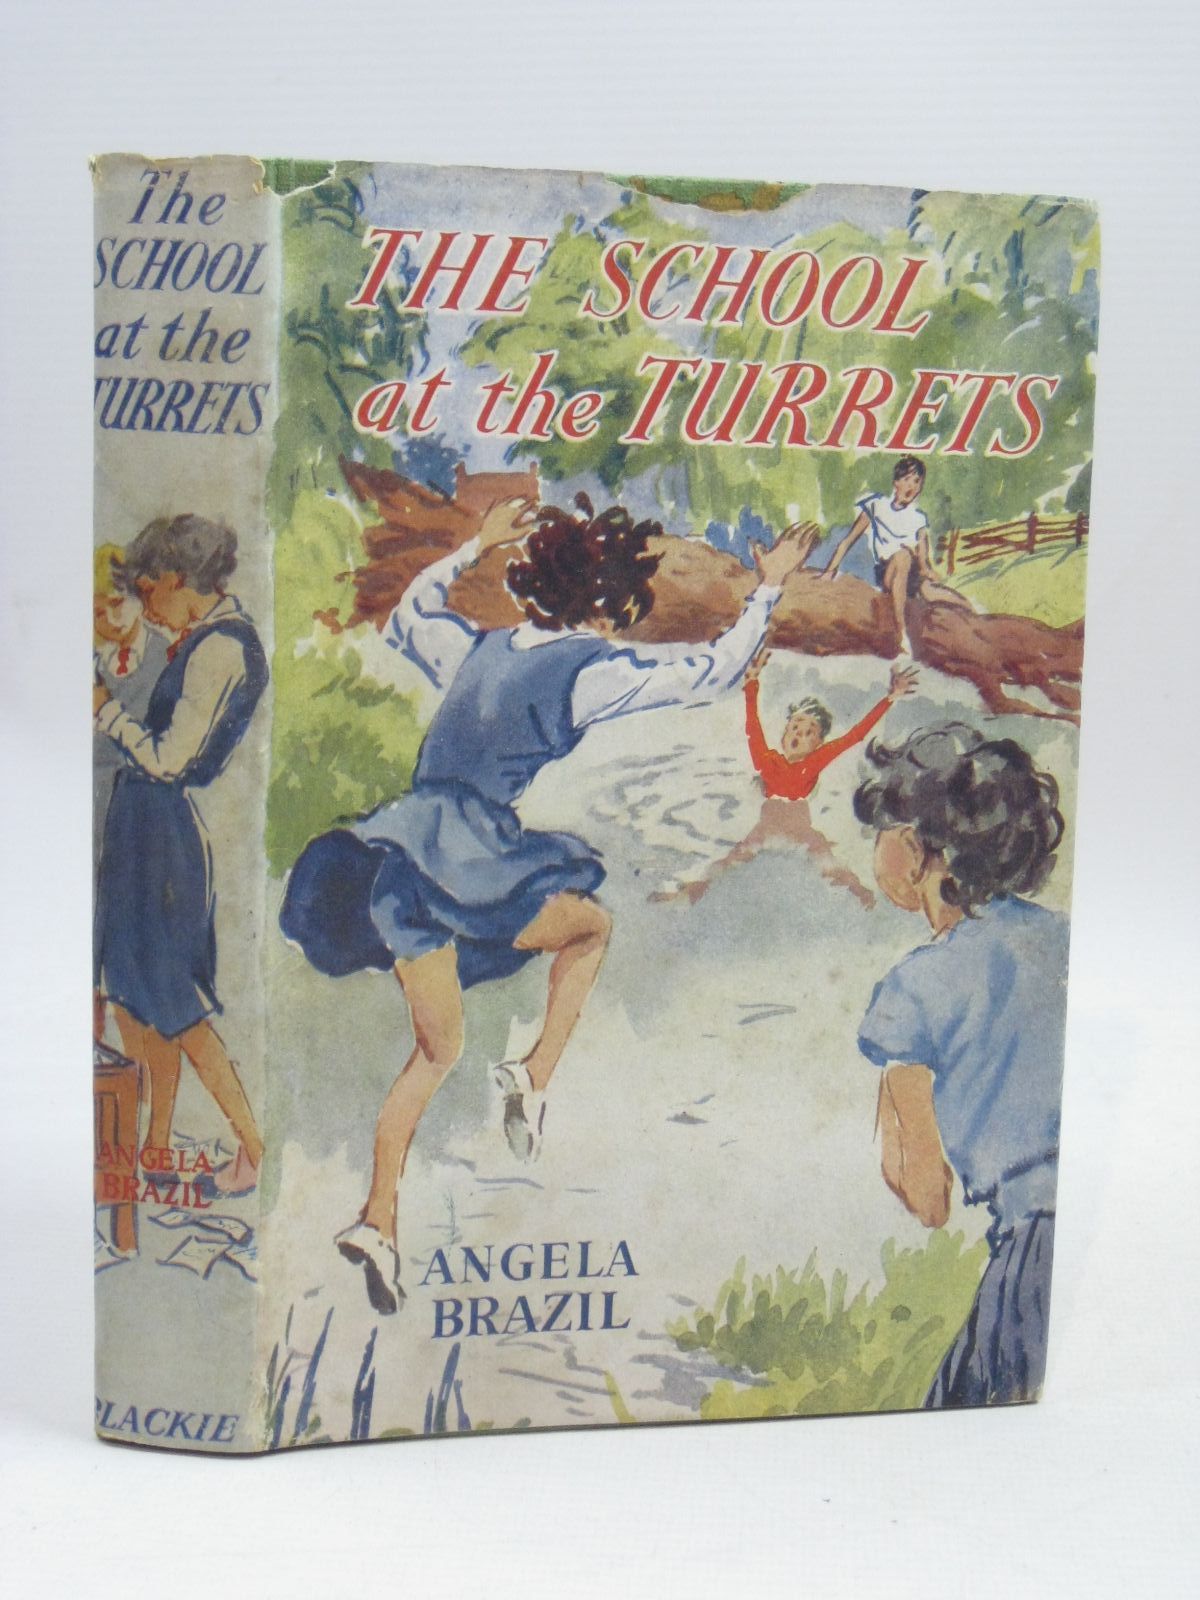 Cover of THE SCHOOL AT THE TURRETS by Angela Brazil